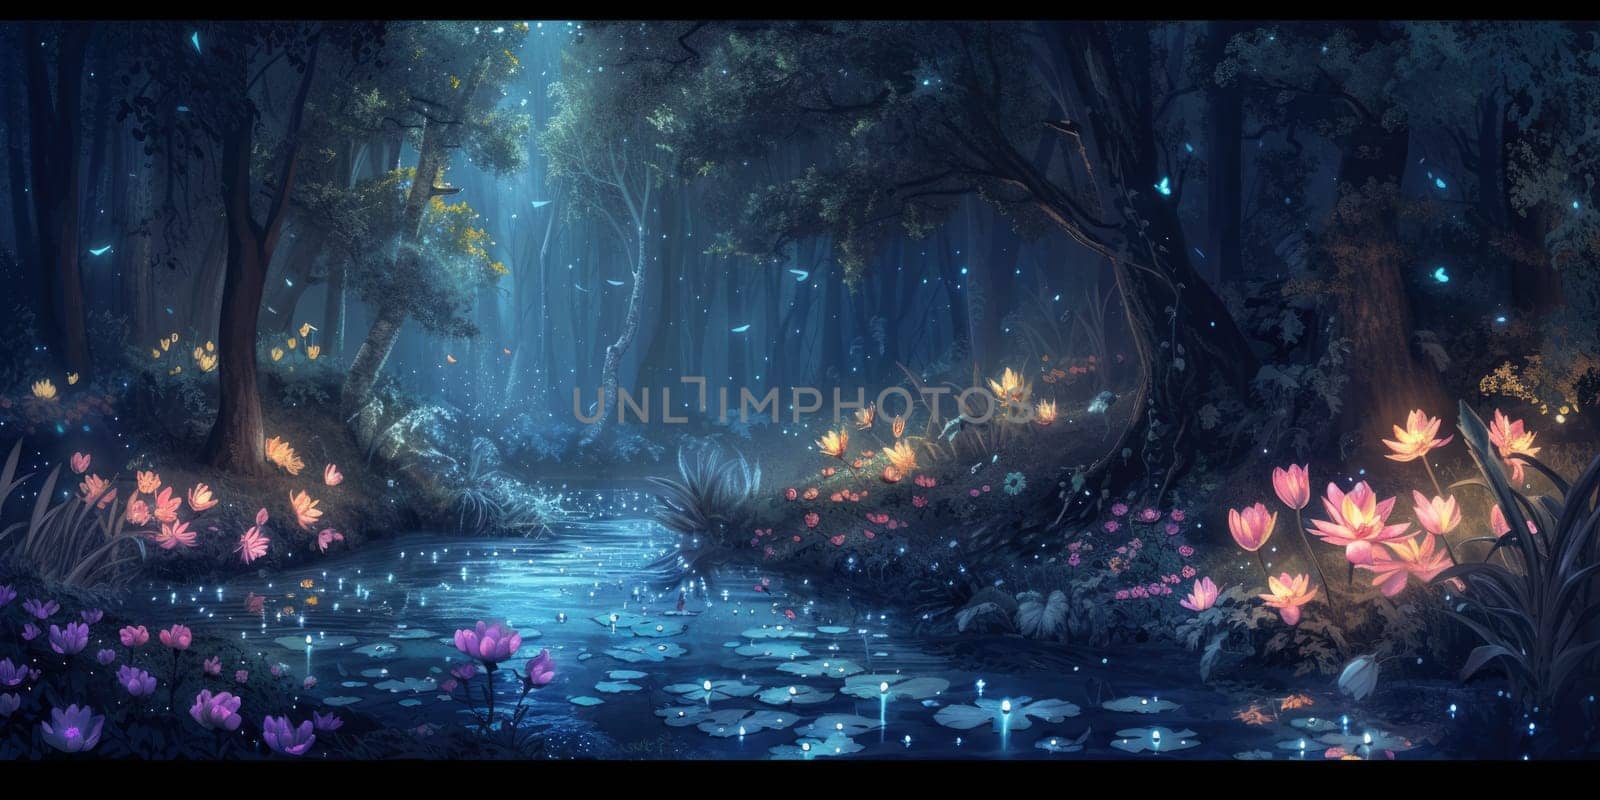 An enchanted forest at night, with glowing flowers,. Resplendent. by biancoblue